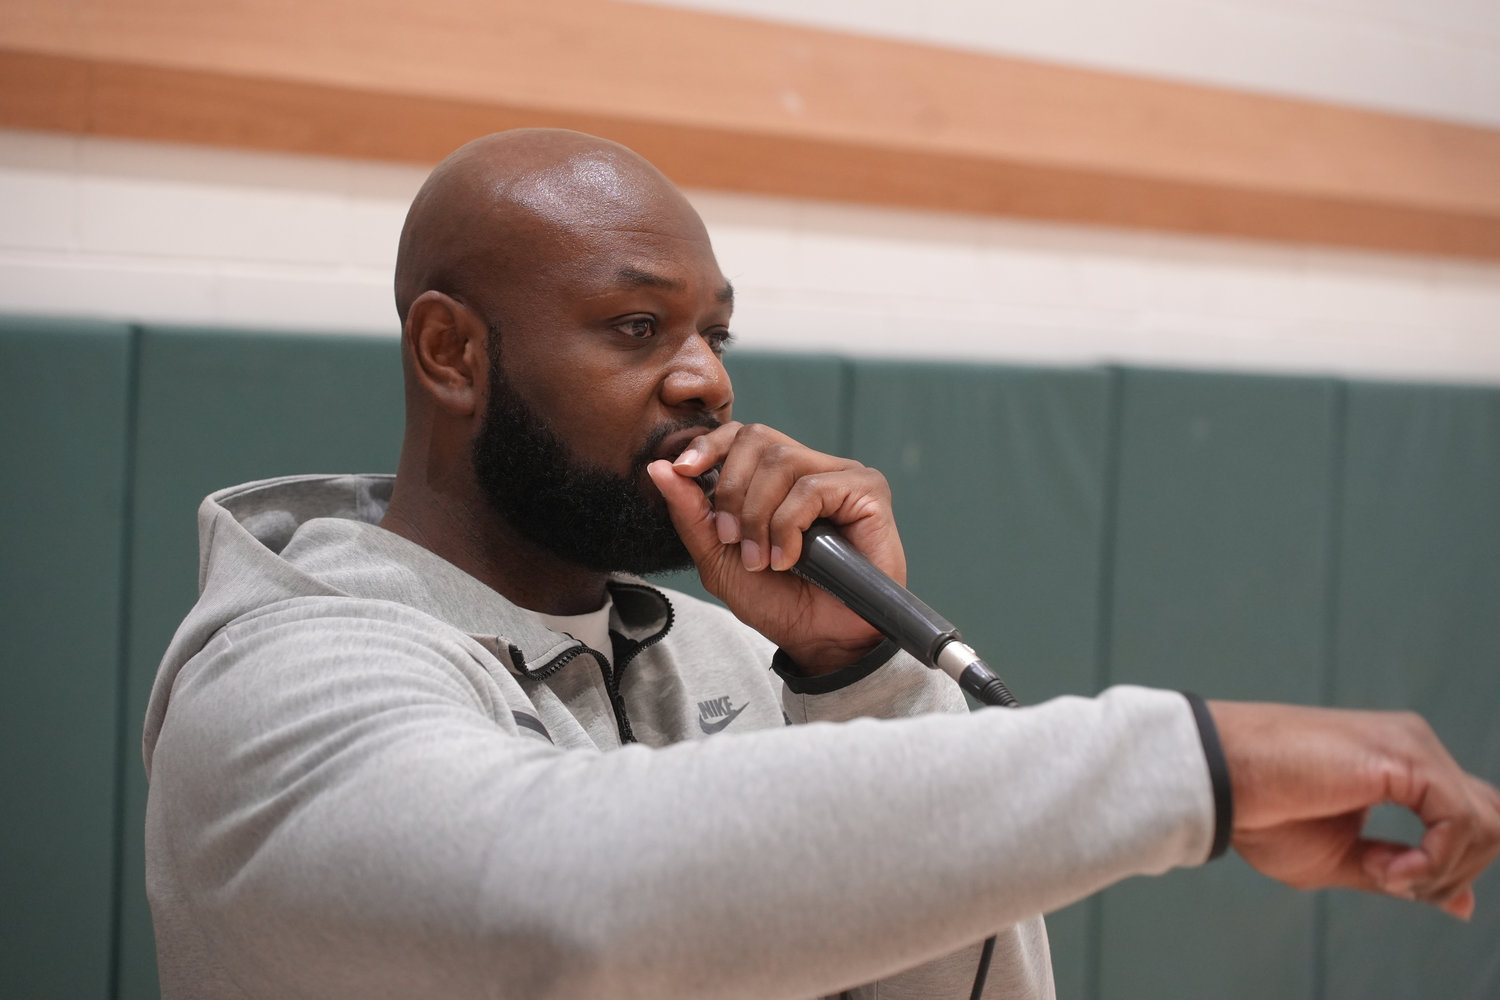 Kashif Hameed, program organizer, former basketball player for Iona University and Harlem School principal, brought the clinic to Elmont to help kids and teens not only improve their basketball abilities, but also their mental wellness and self esteem.